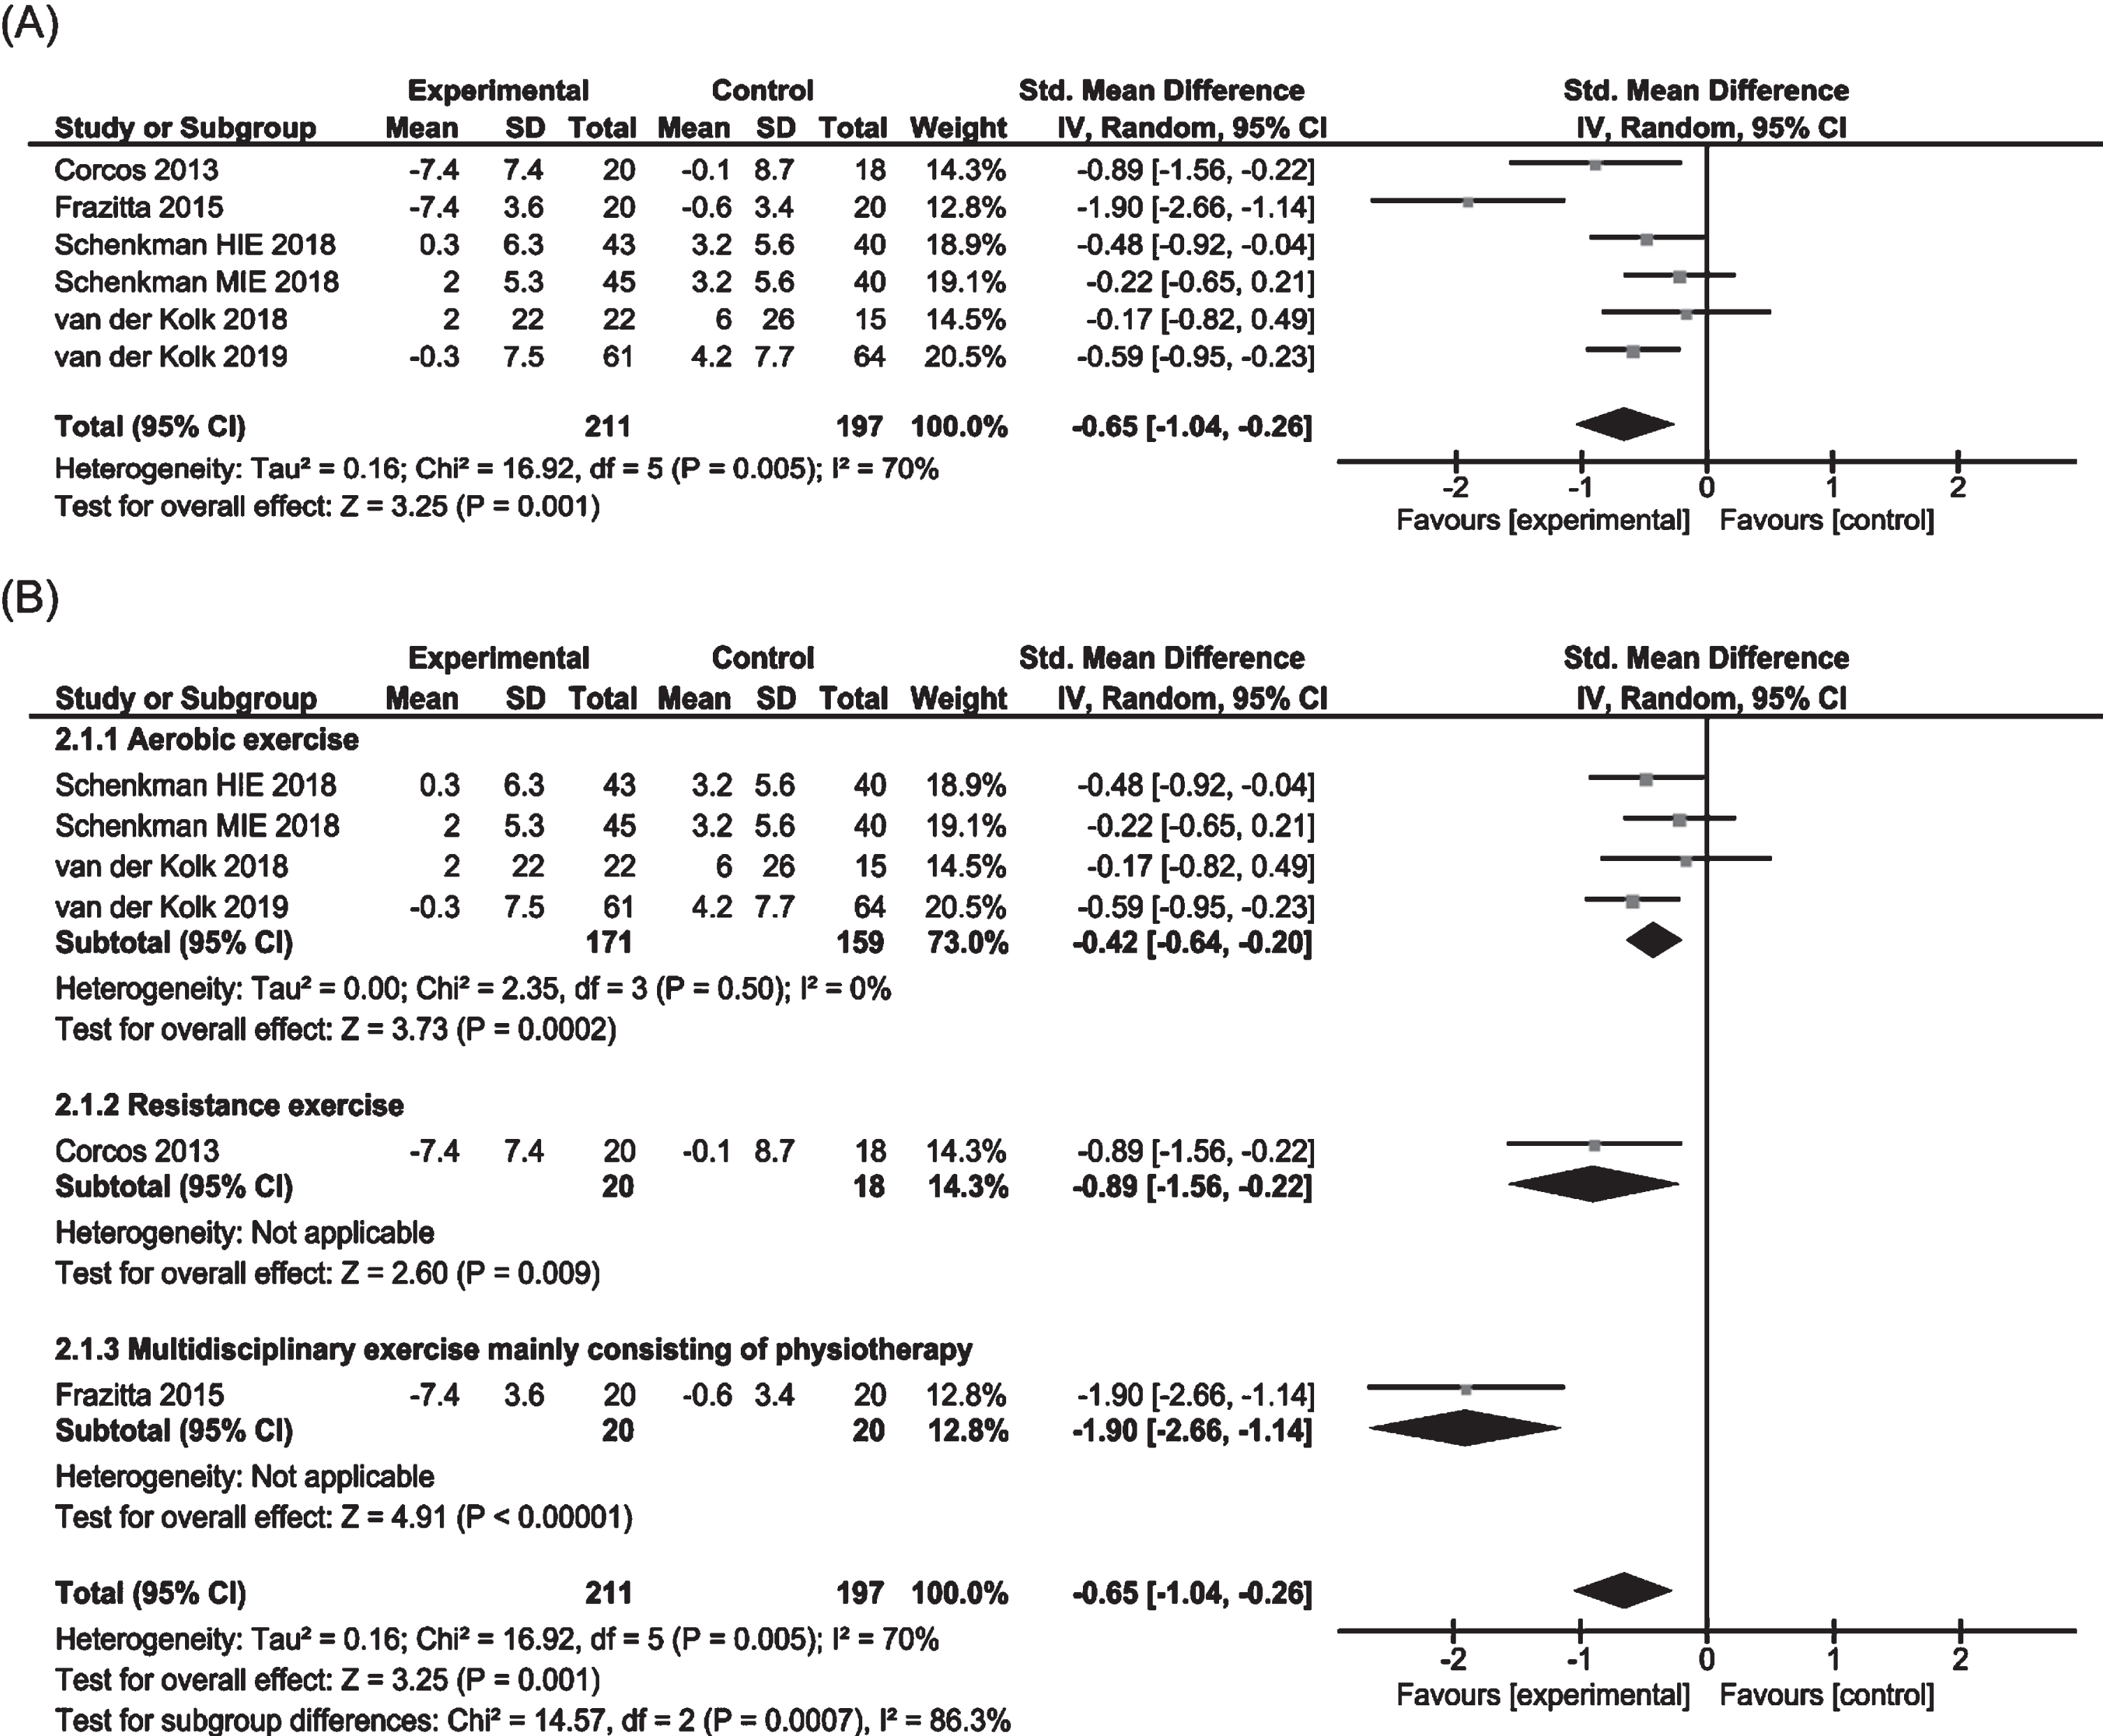 Forest plots of MDS-UPDRS/UPDRS motor score in off medication state for physiotherapy versus no/control intervention. (A) Overall effect of physiotherapy interventions. (B) Subgroup analysis (category of intervention).